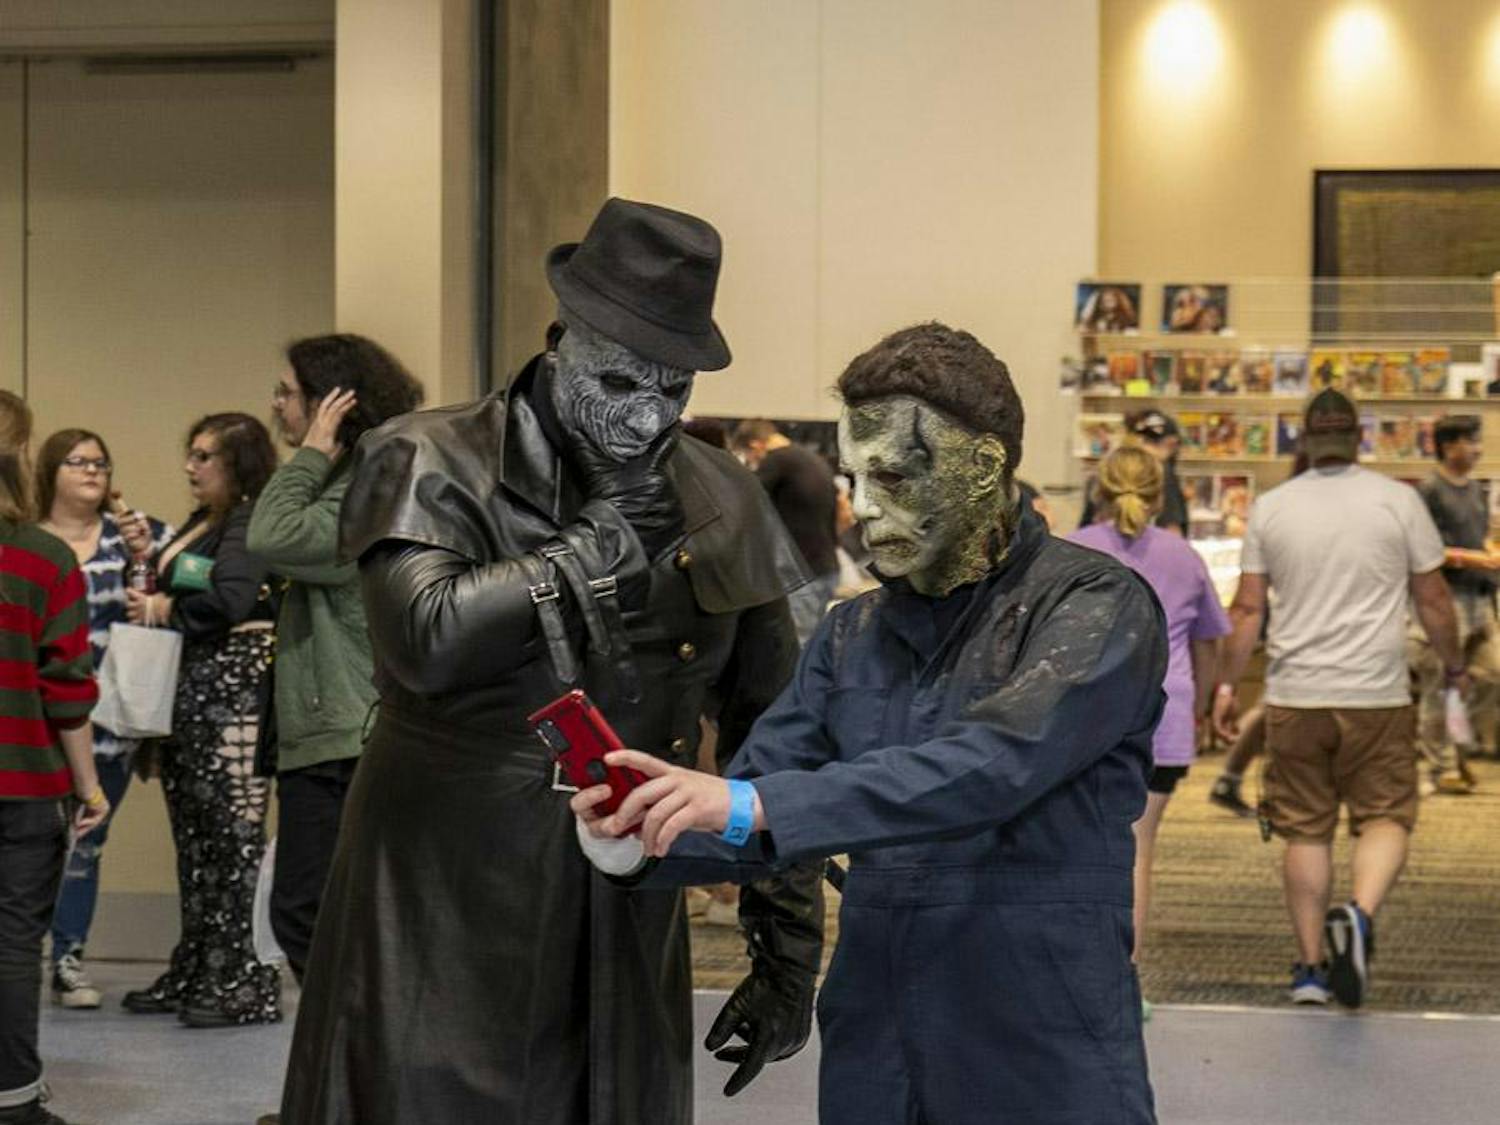 Cole Bapties (right), from Beaufort, South Carolina, and dressed as Michael Myers from the "Halloween" horror franchise, takes a selfie with a cosplayer wearing a "Resident Evil" Mr. X costume (left) at the South Carolina Horror Convention on Sept. 16, 2023. The convention featured a cosplay competition on Sept. 17, 2023, where attendees dressed up as their favorite horror characters.